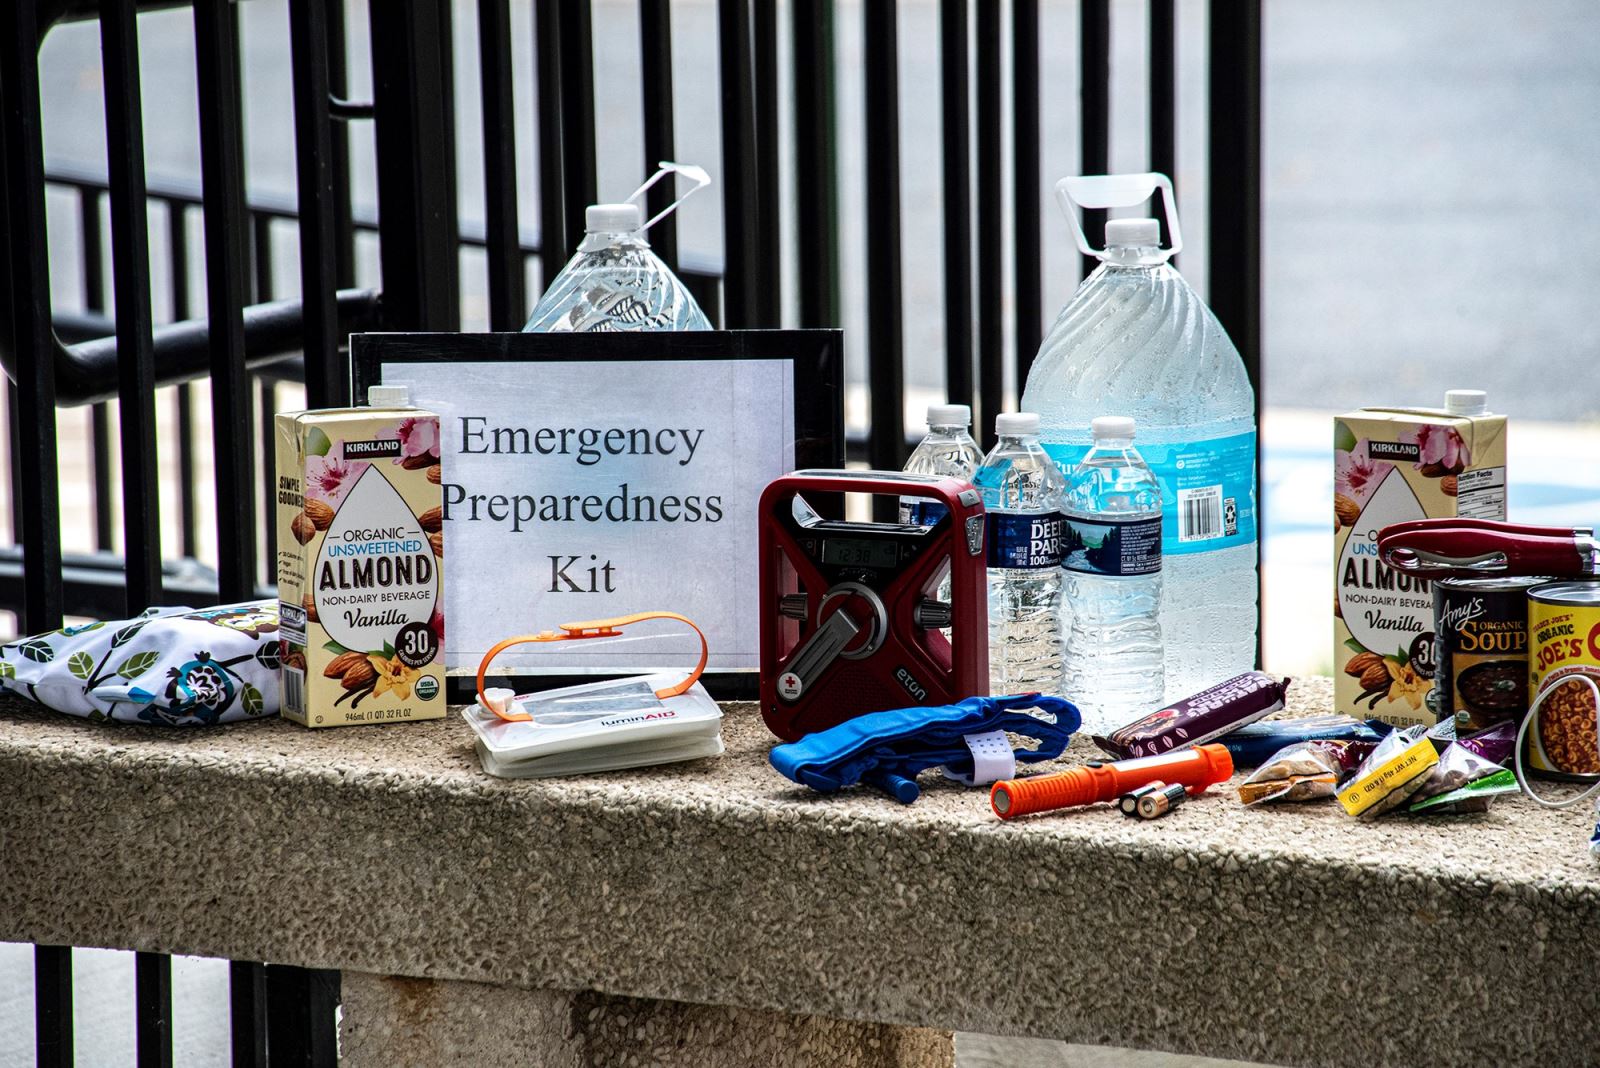 Upgrade your Emergency Kit - COVID-19 Information Portal